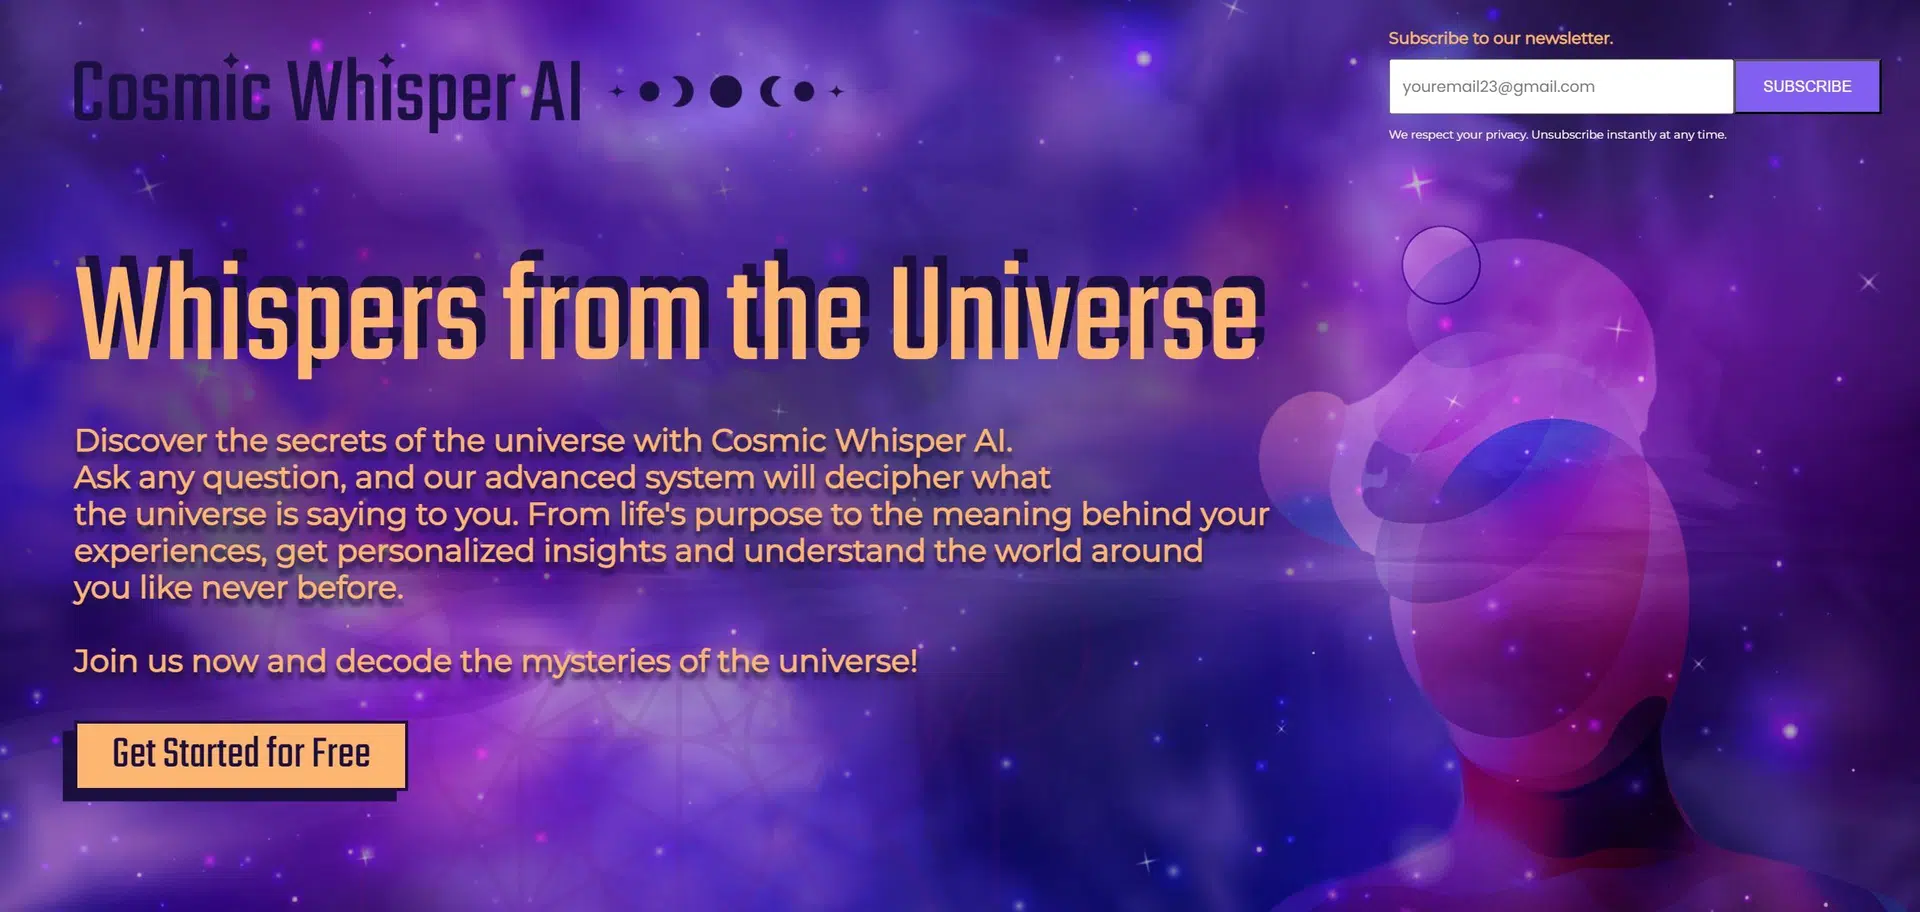 Cosmic Whisper AIwebsite picture